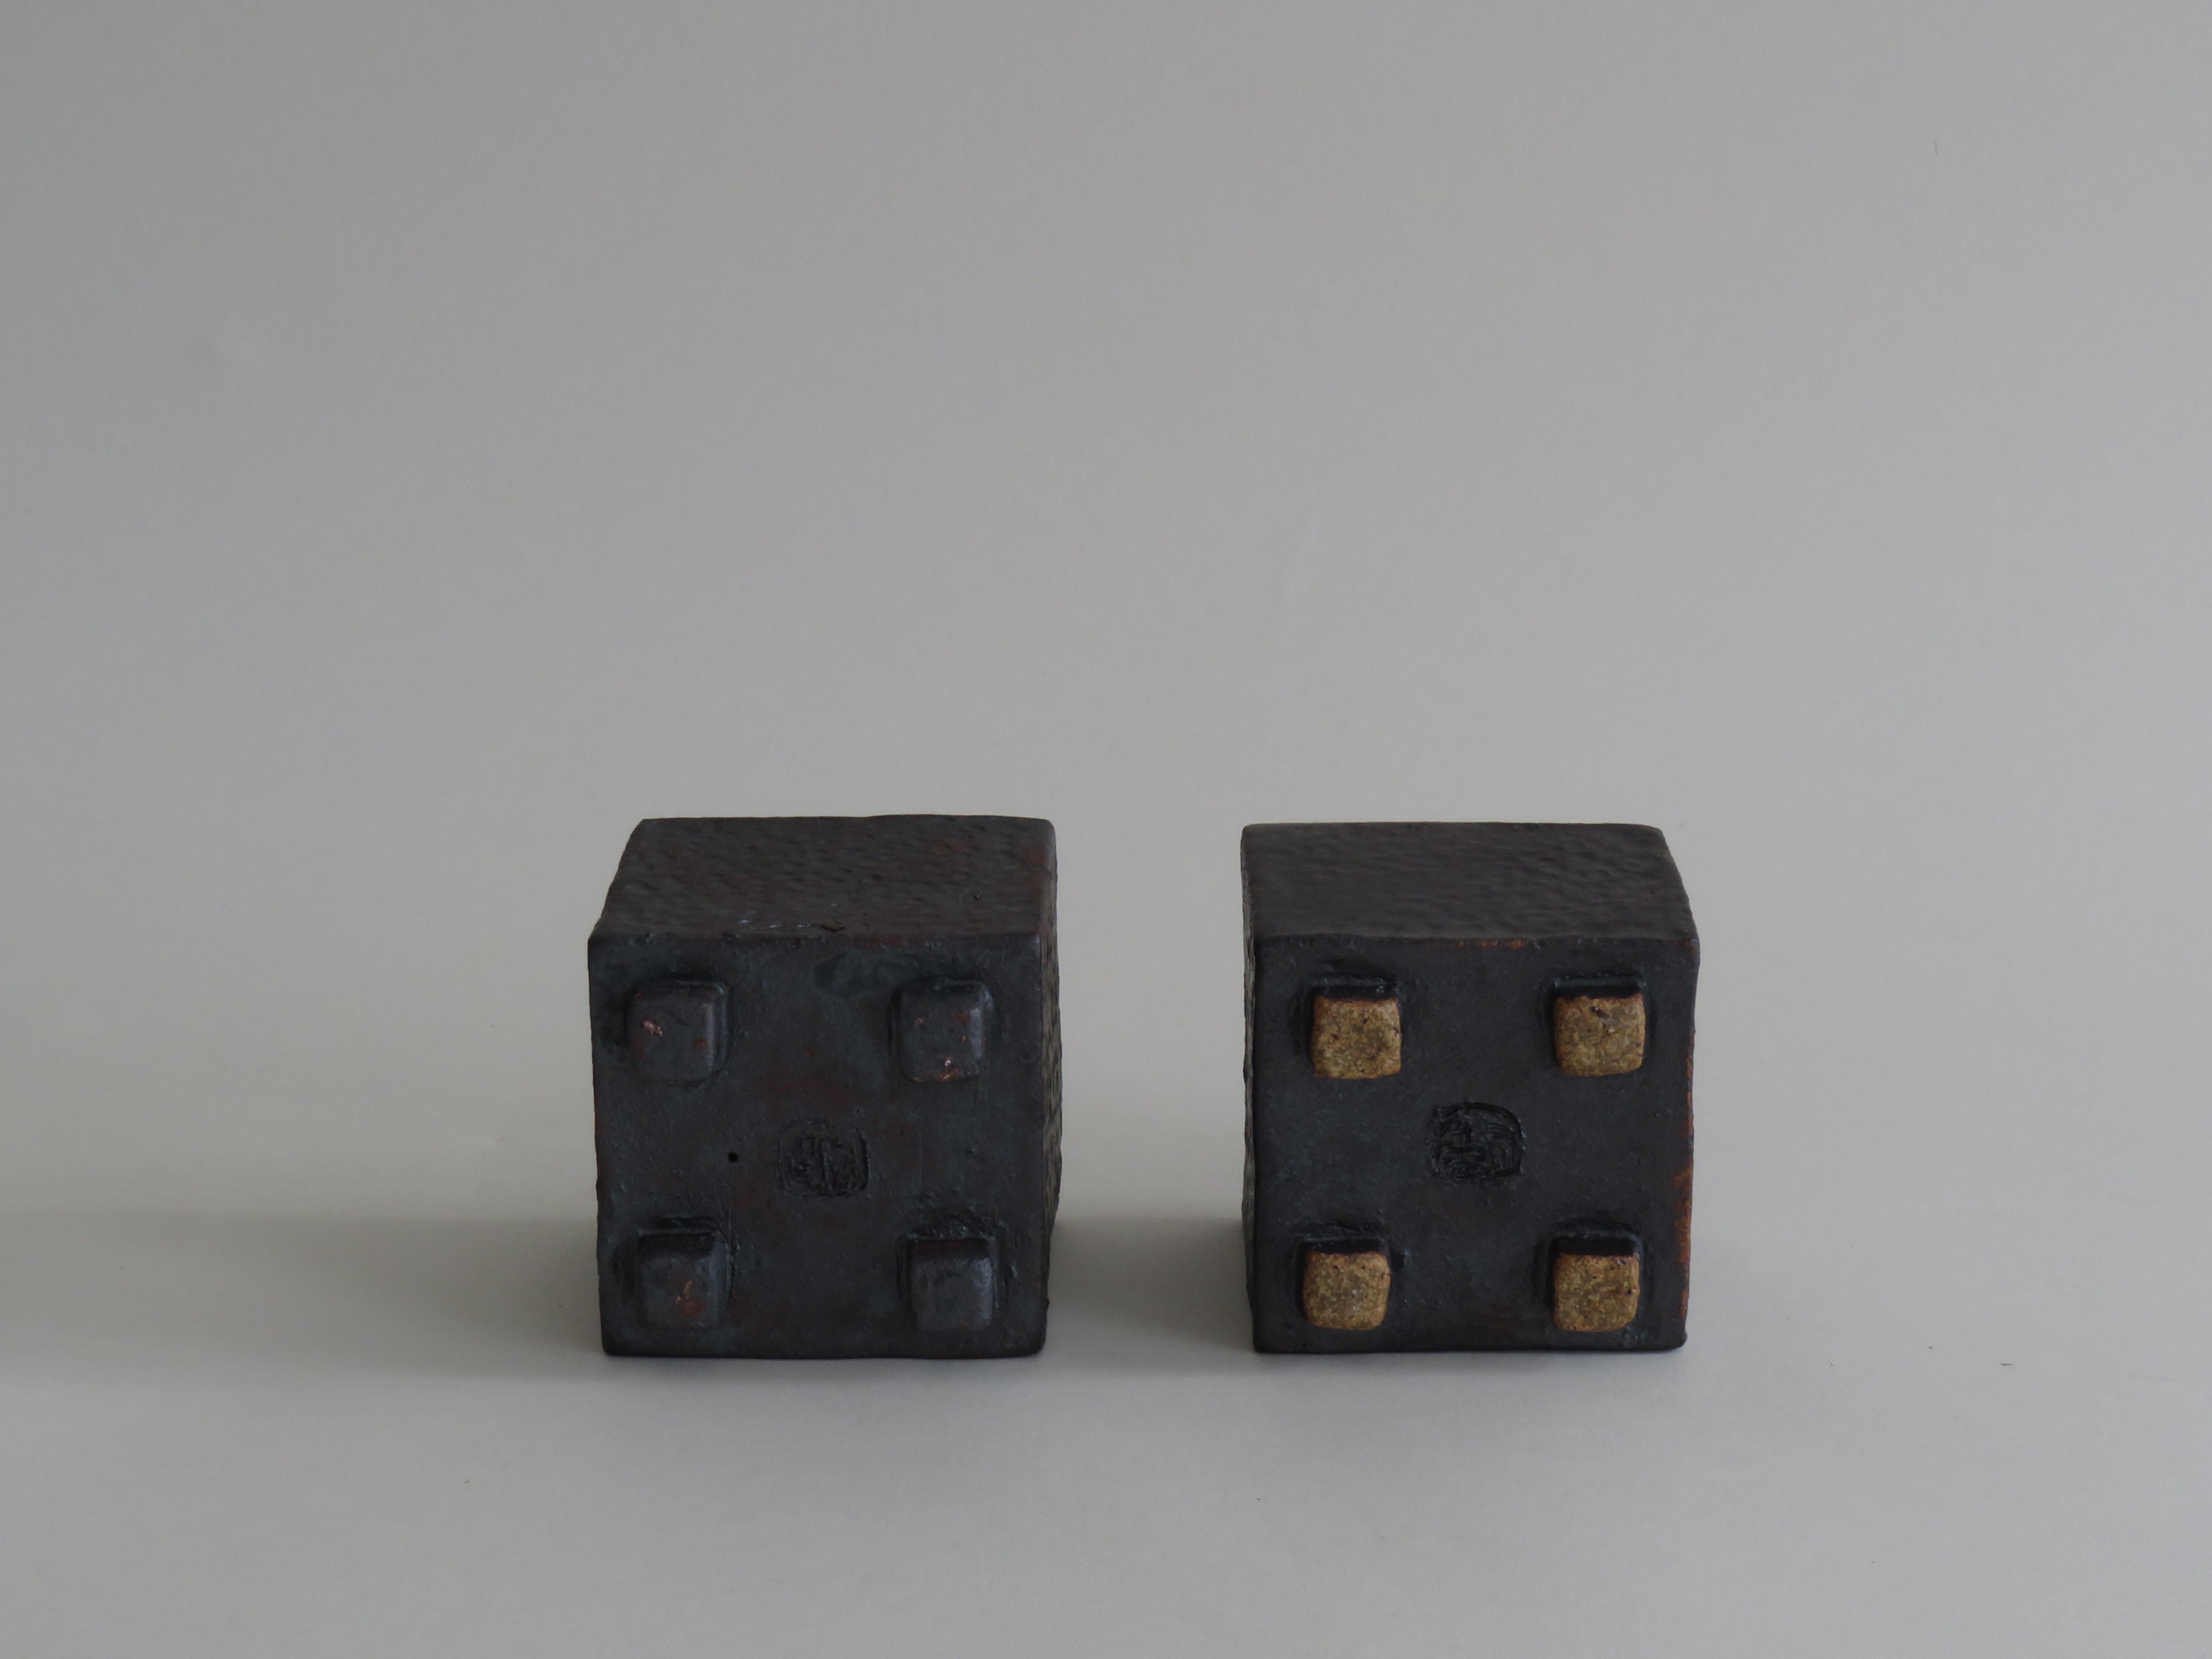 Small Ceramic Contemplation Cube, Mottled Surface in Metallic Black-Brown Glaze 2